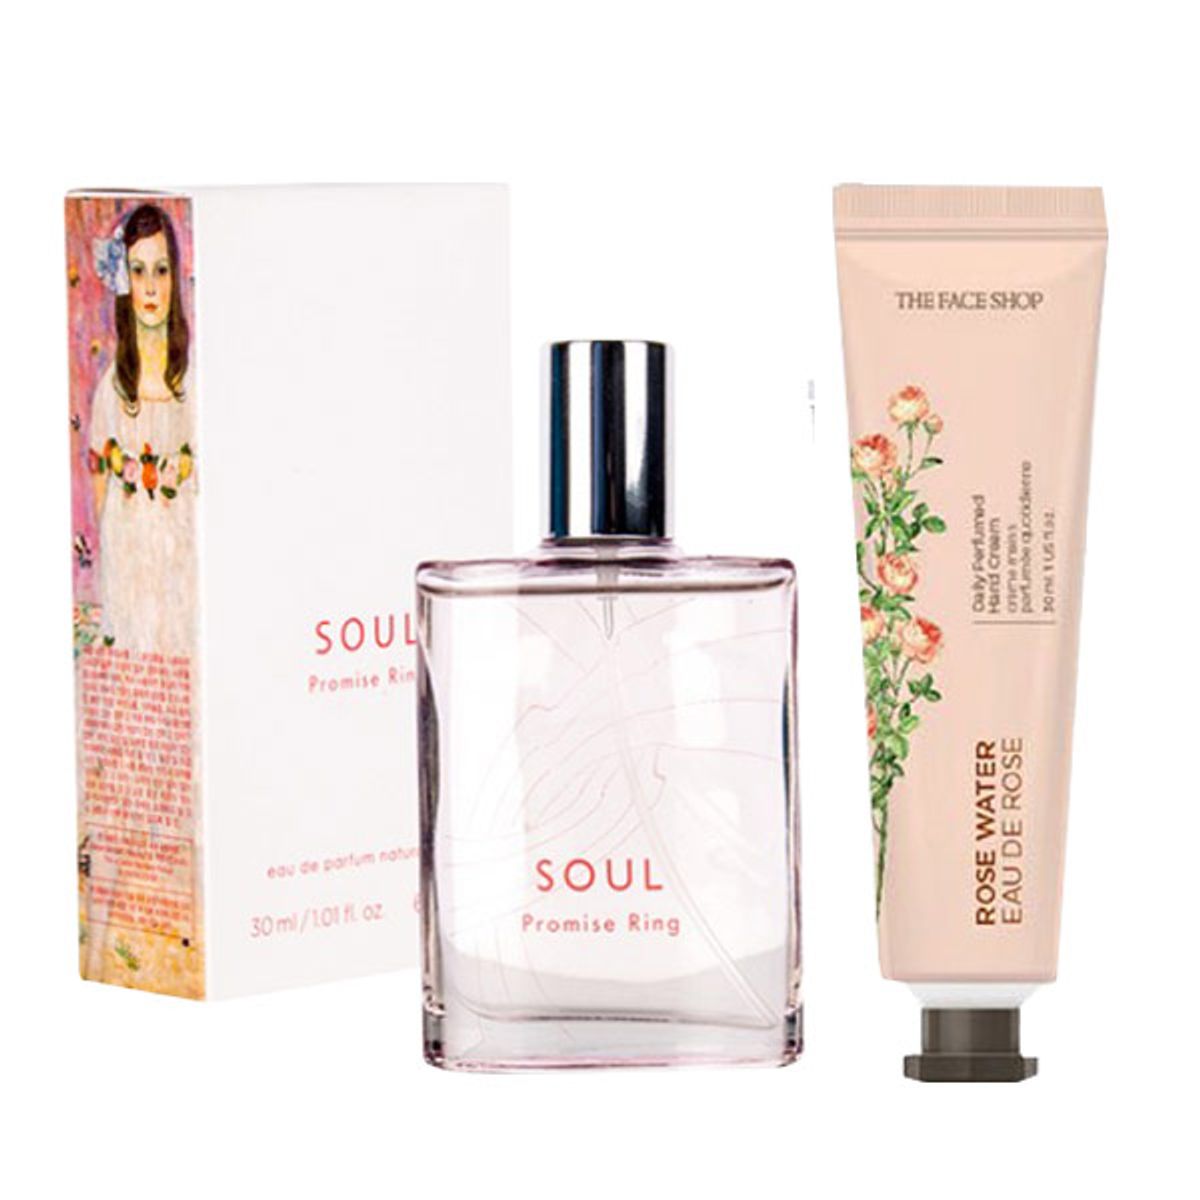 bo-cham-soc-co-the-soul-promise-ring-daily-perfumed-hand-cream-01-rose-water-1